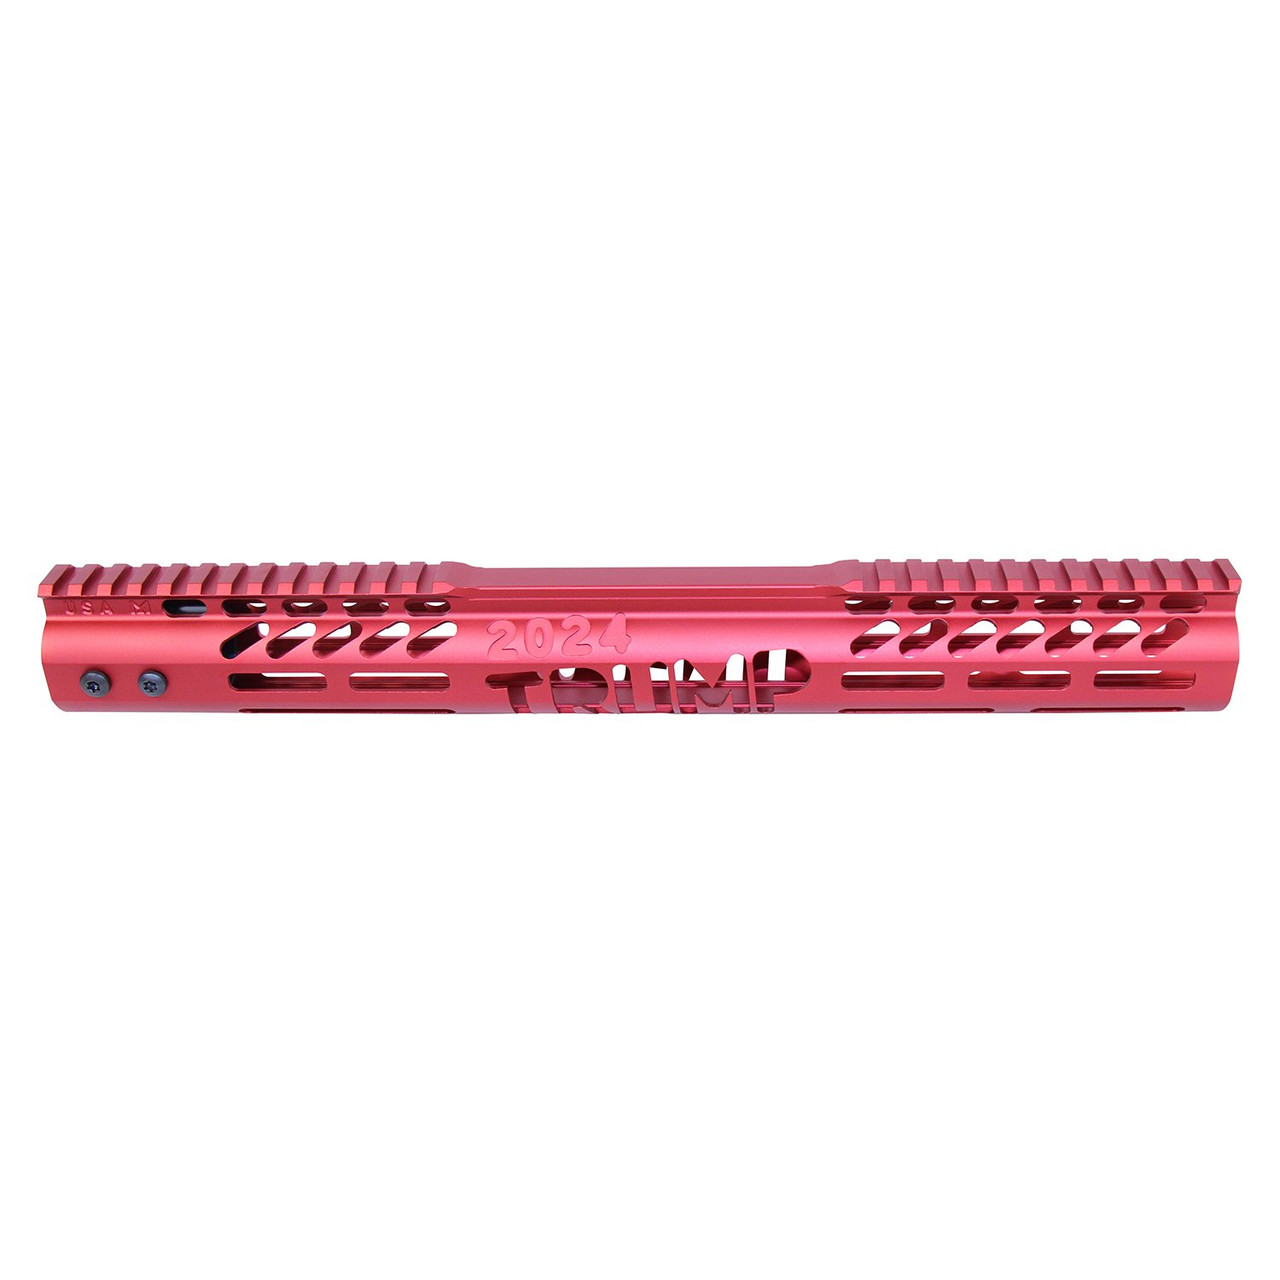 Guntec USA GT-15MLK-TRUMP-RED 15" "Trump Series" Limited Edition M-LOK System Free Floating Handguard With Monolithic Top Rail (Anodized Red)